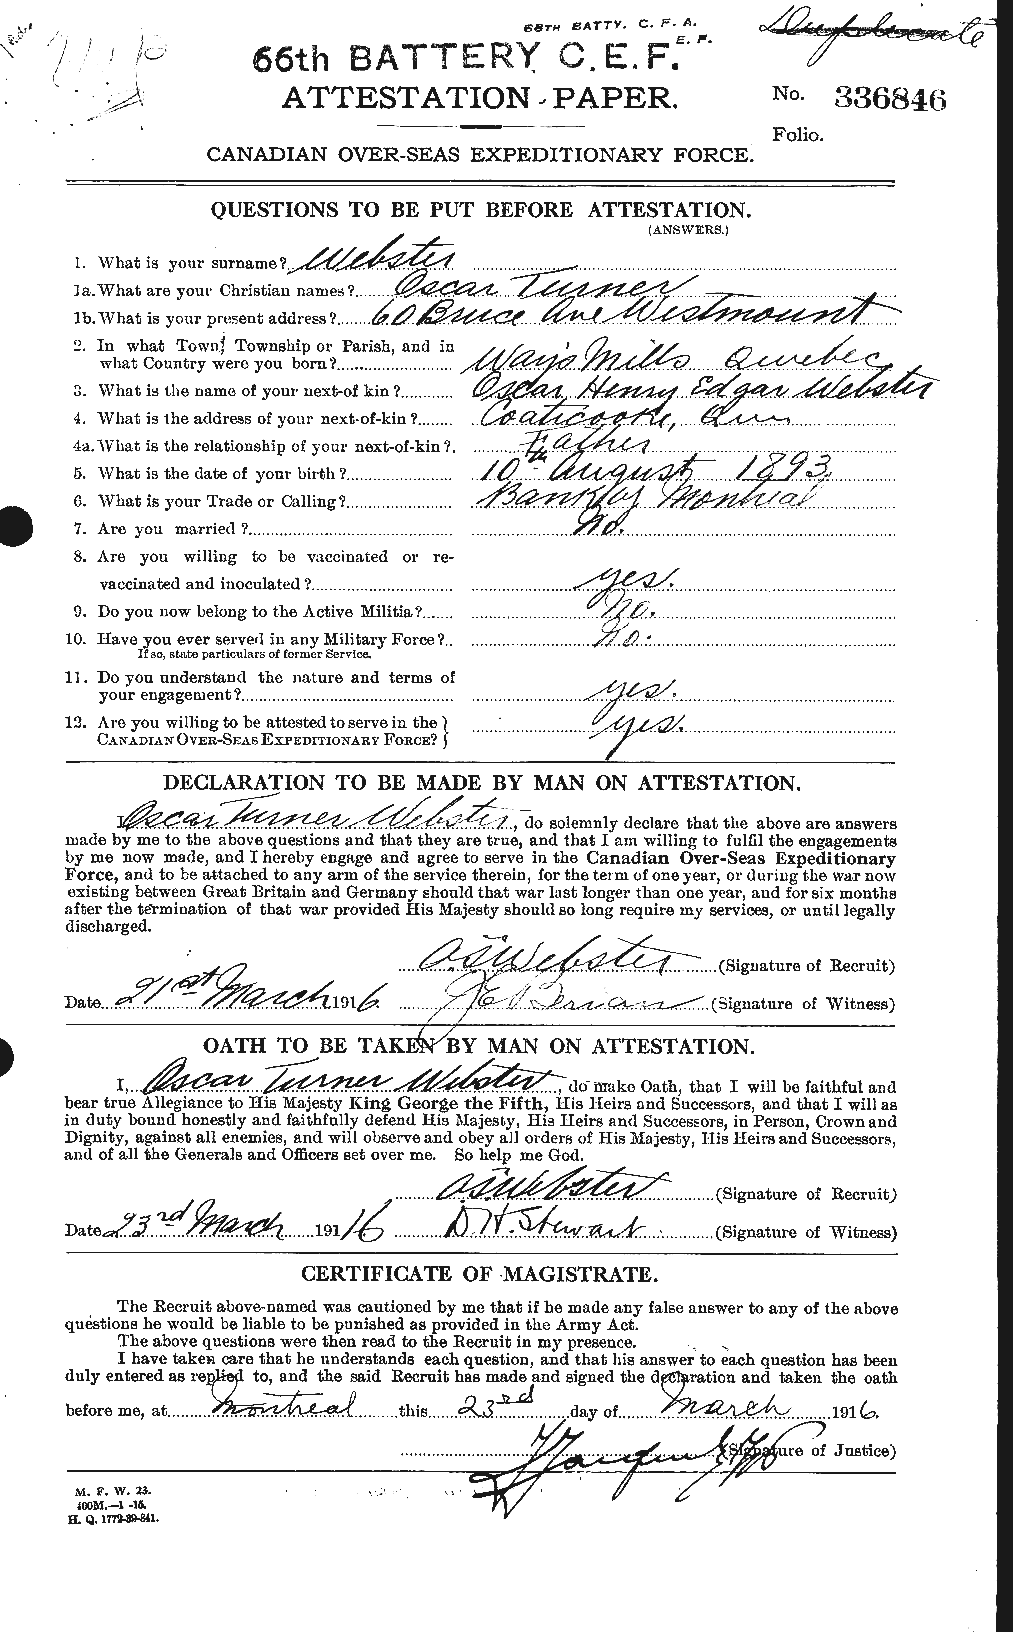 Personnel Records of the First World War - CEF 670528a